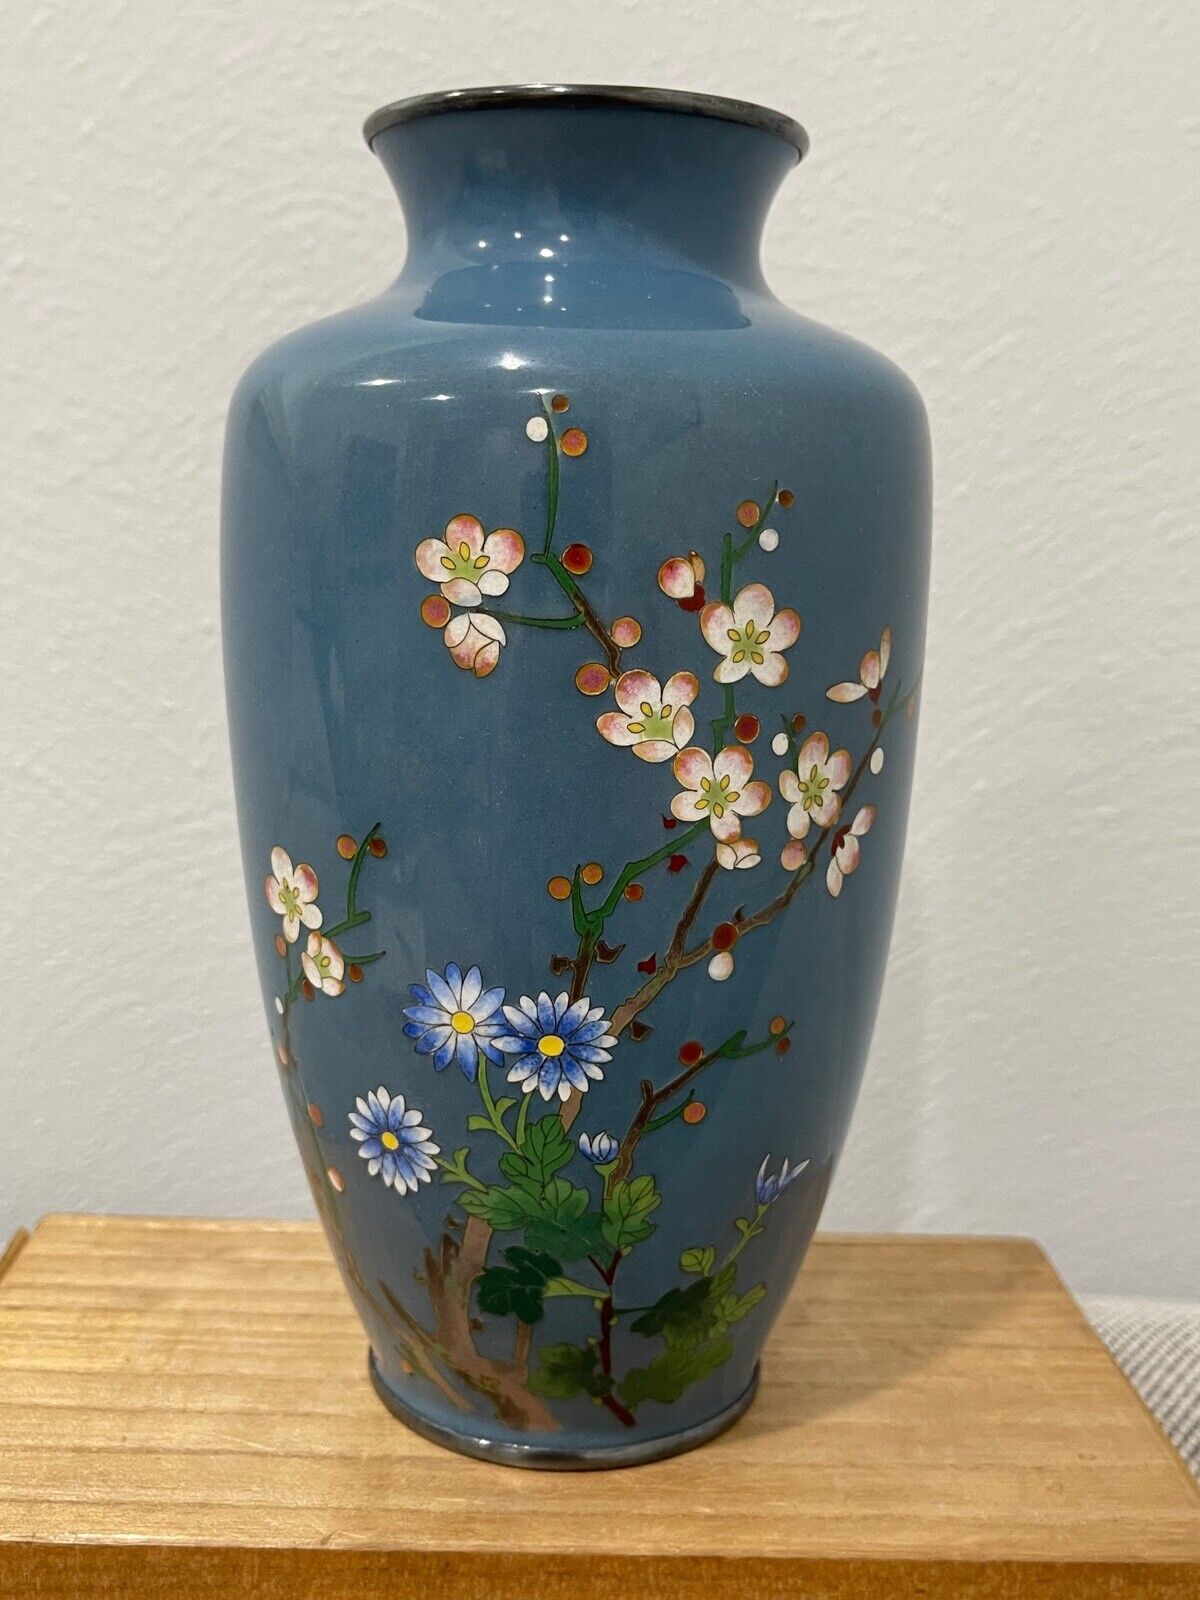 Vintage Japanese Silver Mounted Silver Wire Cloisonne Vase w/ Flowers Decoration